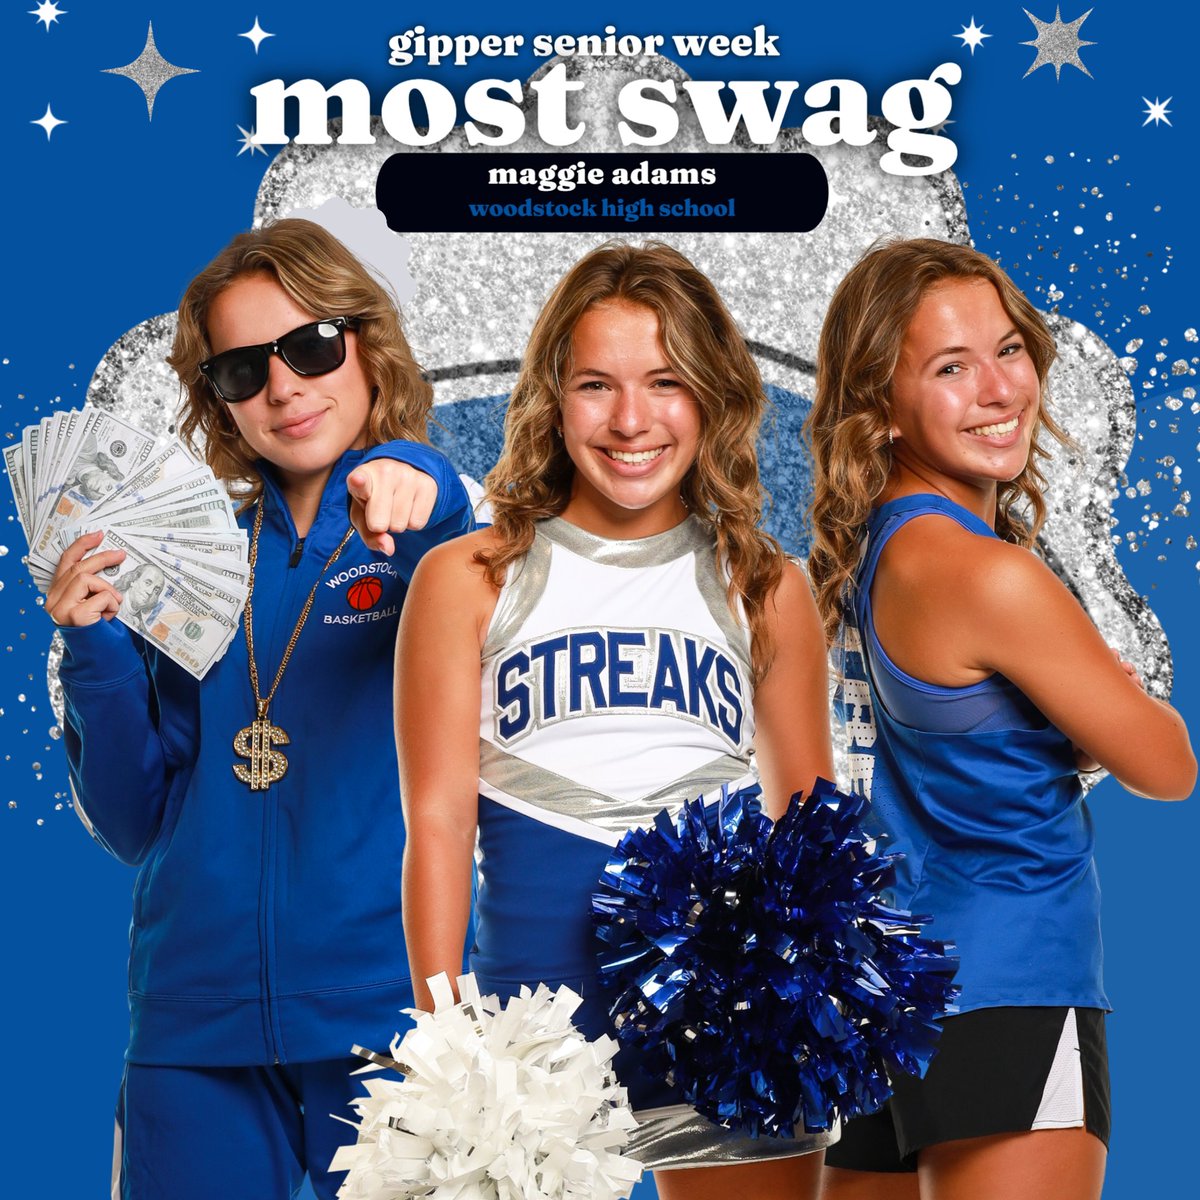 Our nominee for Girls Most Swag, as voted on by the students... MAGGIE ADAMS 💙⚡️ Like, comment & share for Maggie! @gogipper #GipperSeniorWeek